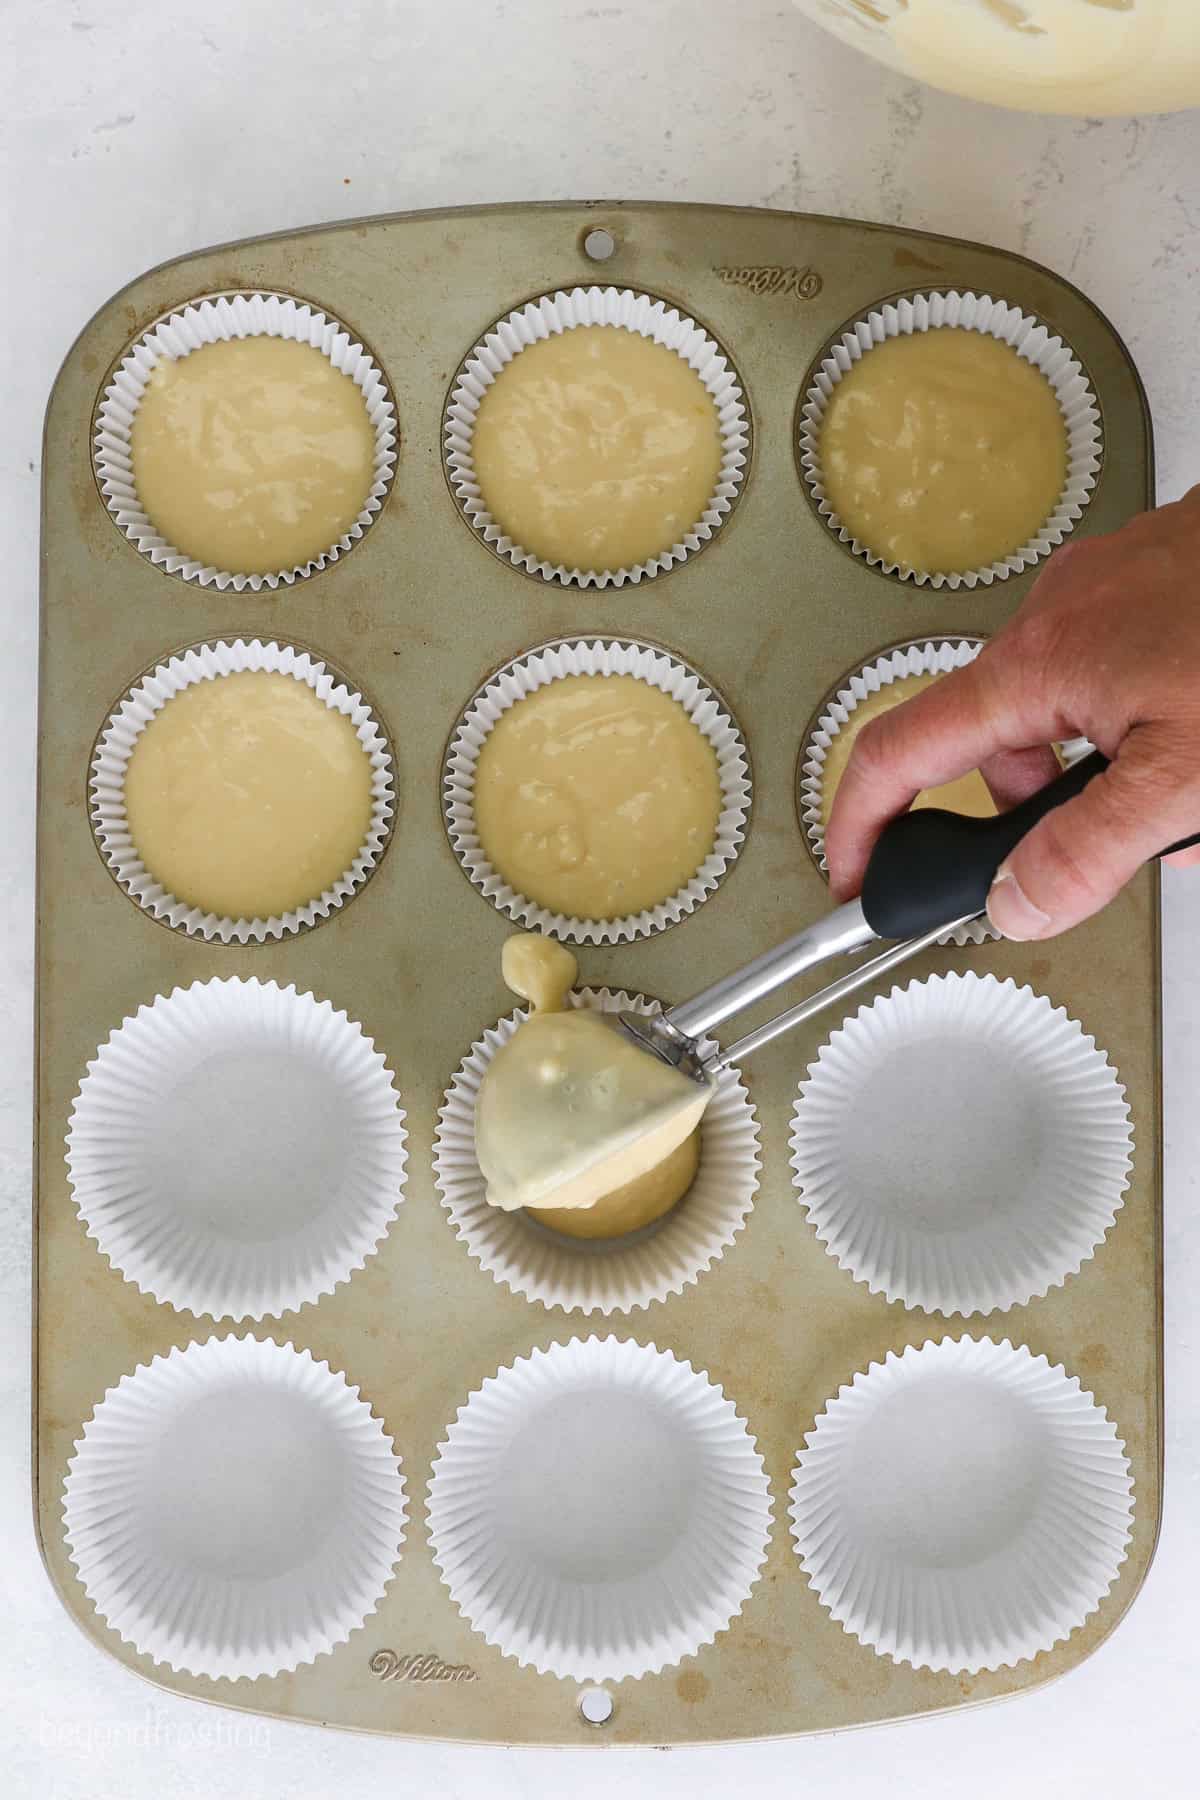 Overhead view of a hand using a cookie scoop to portion yellow cupcake batter in the lined wells of a cupcake pan.